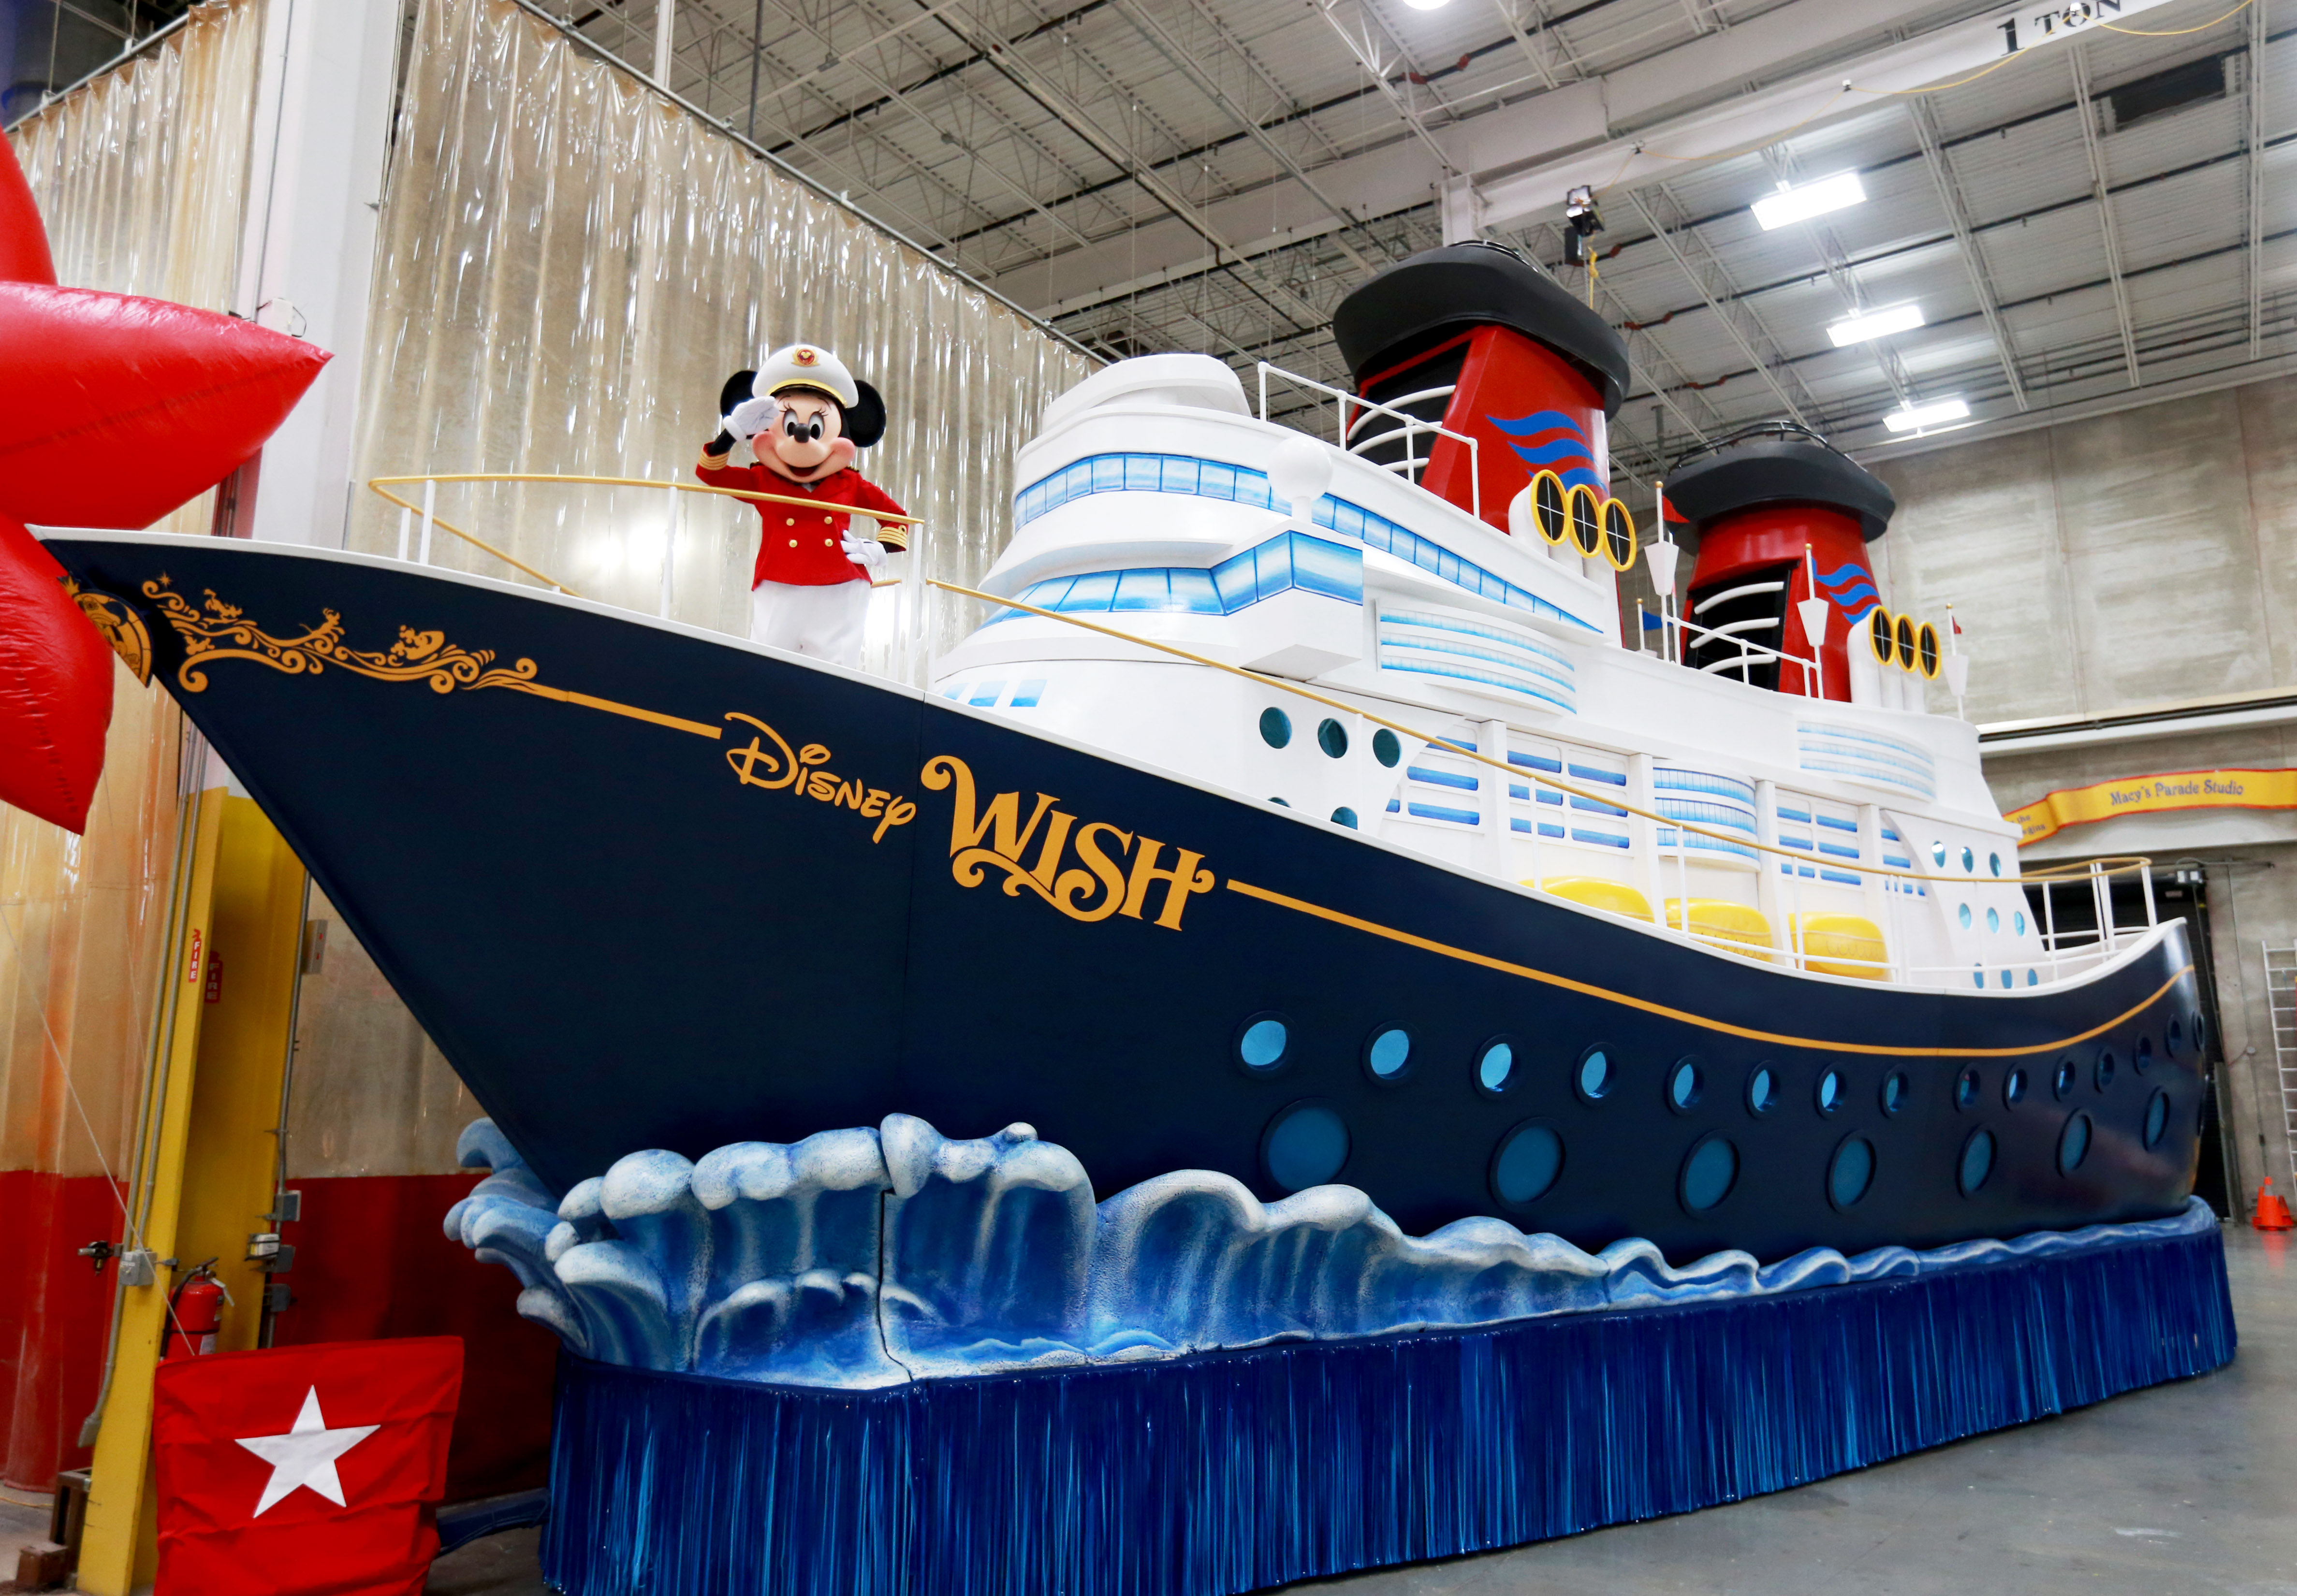 New Disney cruise 'The Disney Wish' christened at Port Canaveral 